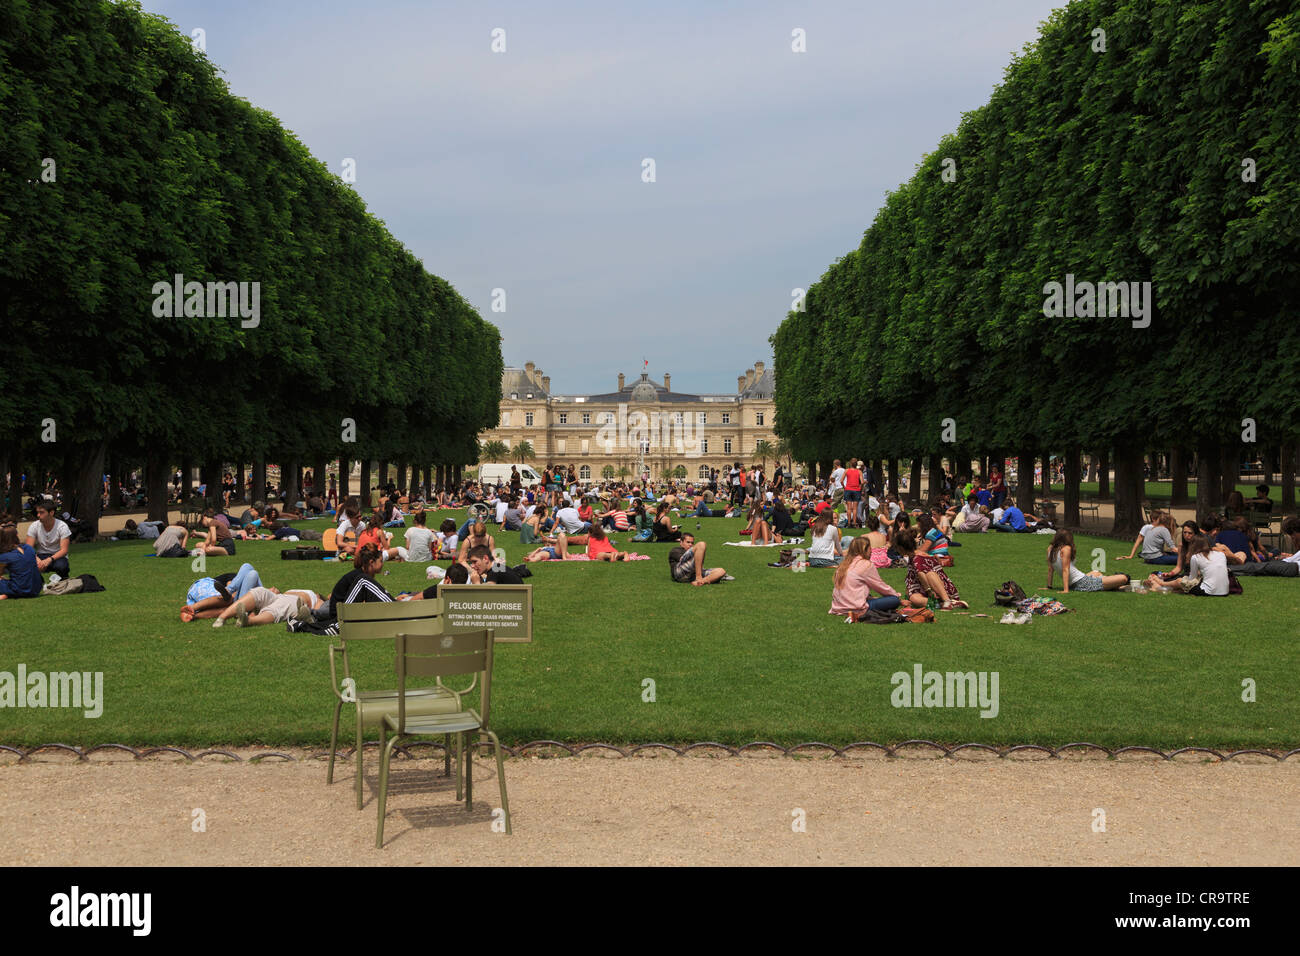 The 60 acre Luxembourg Gardens are the most popular in Paris. Parisians and visitors enjoy the lawns on a sunny day in June. Stock Photo